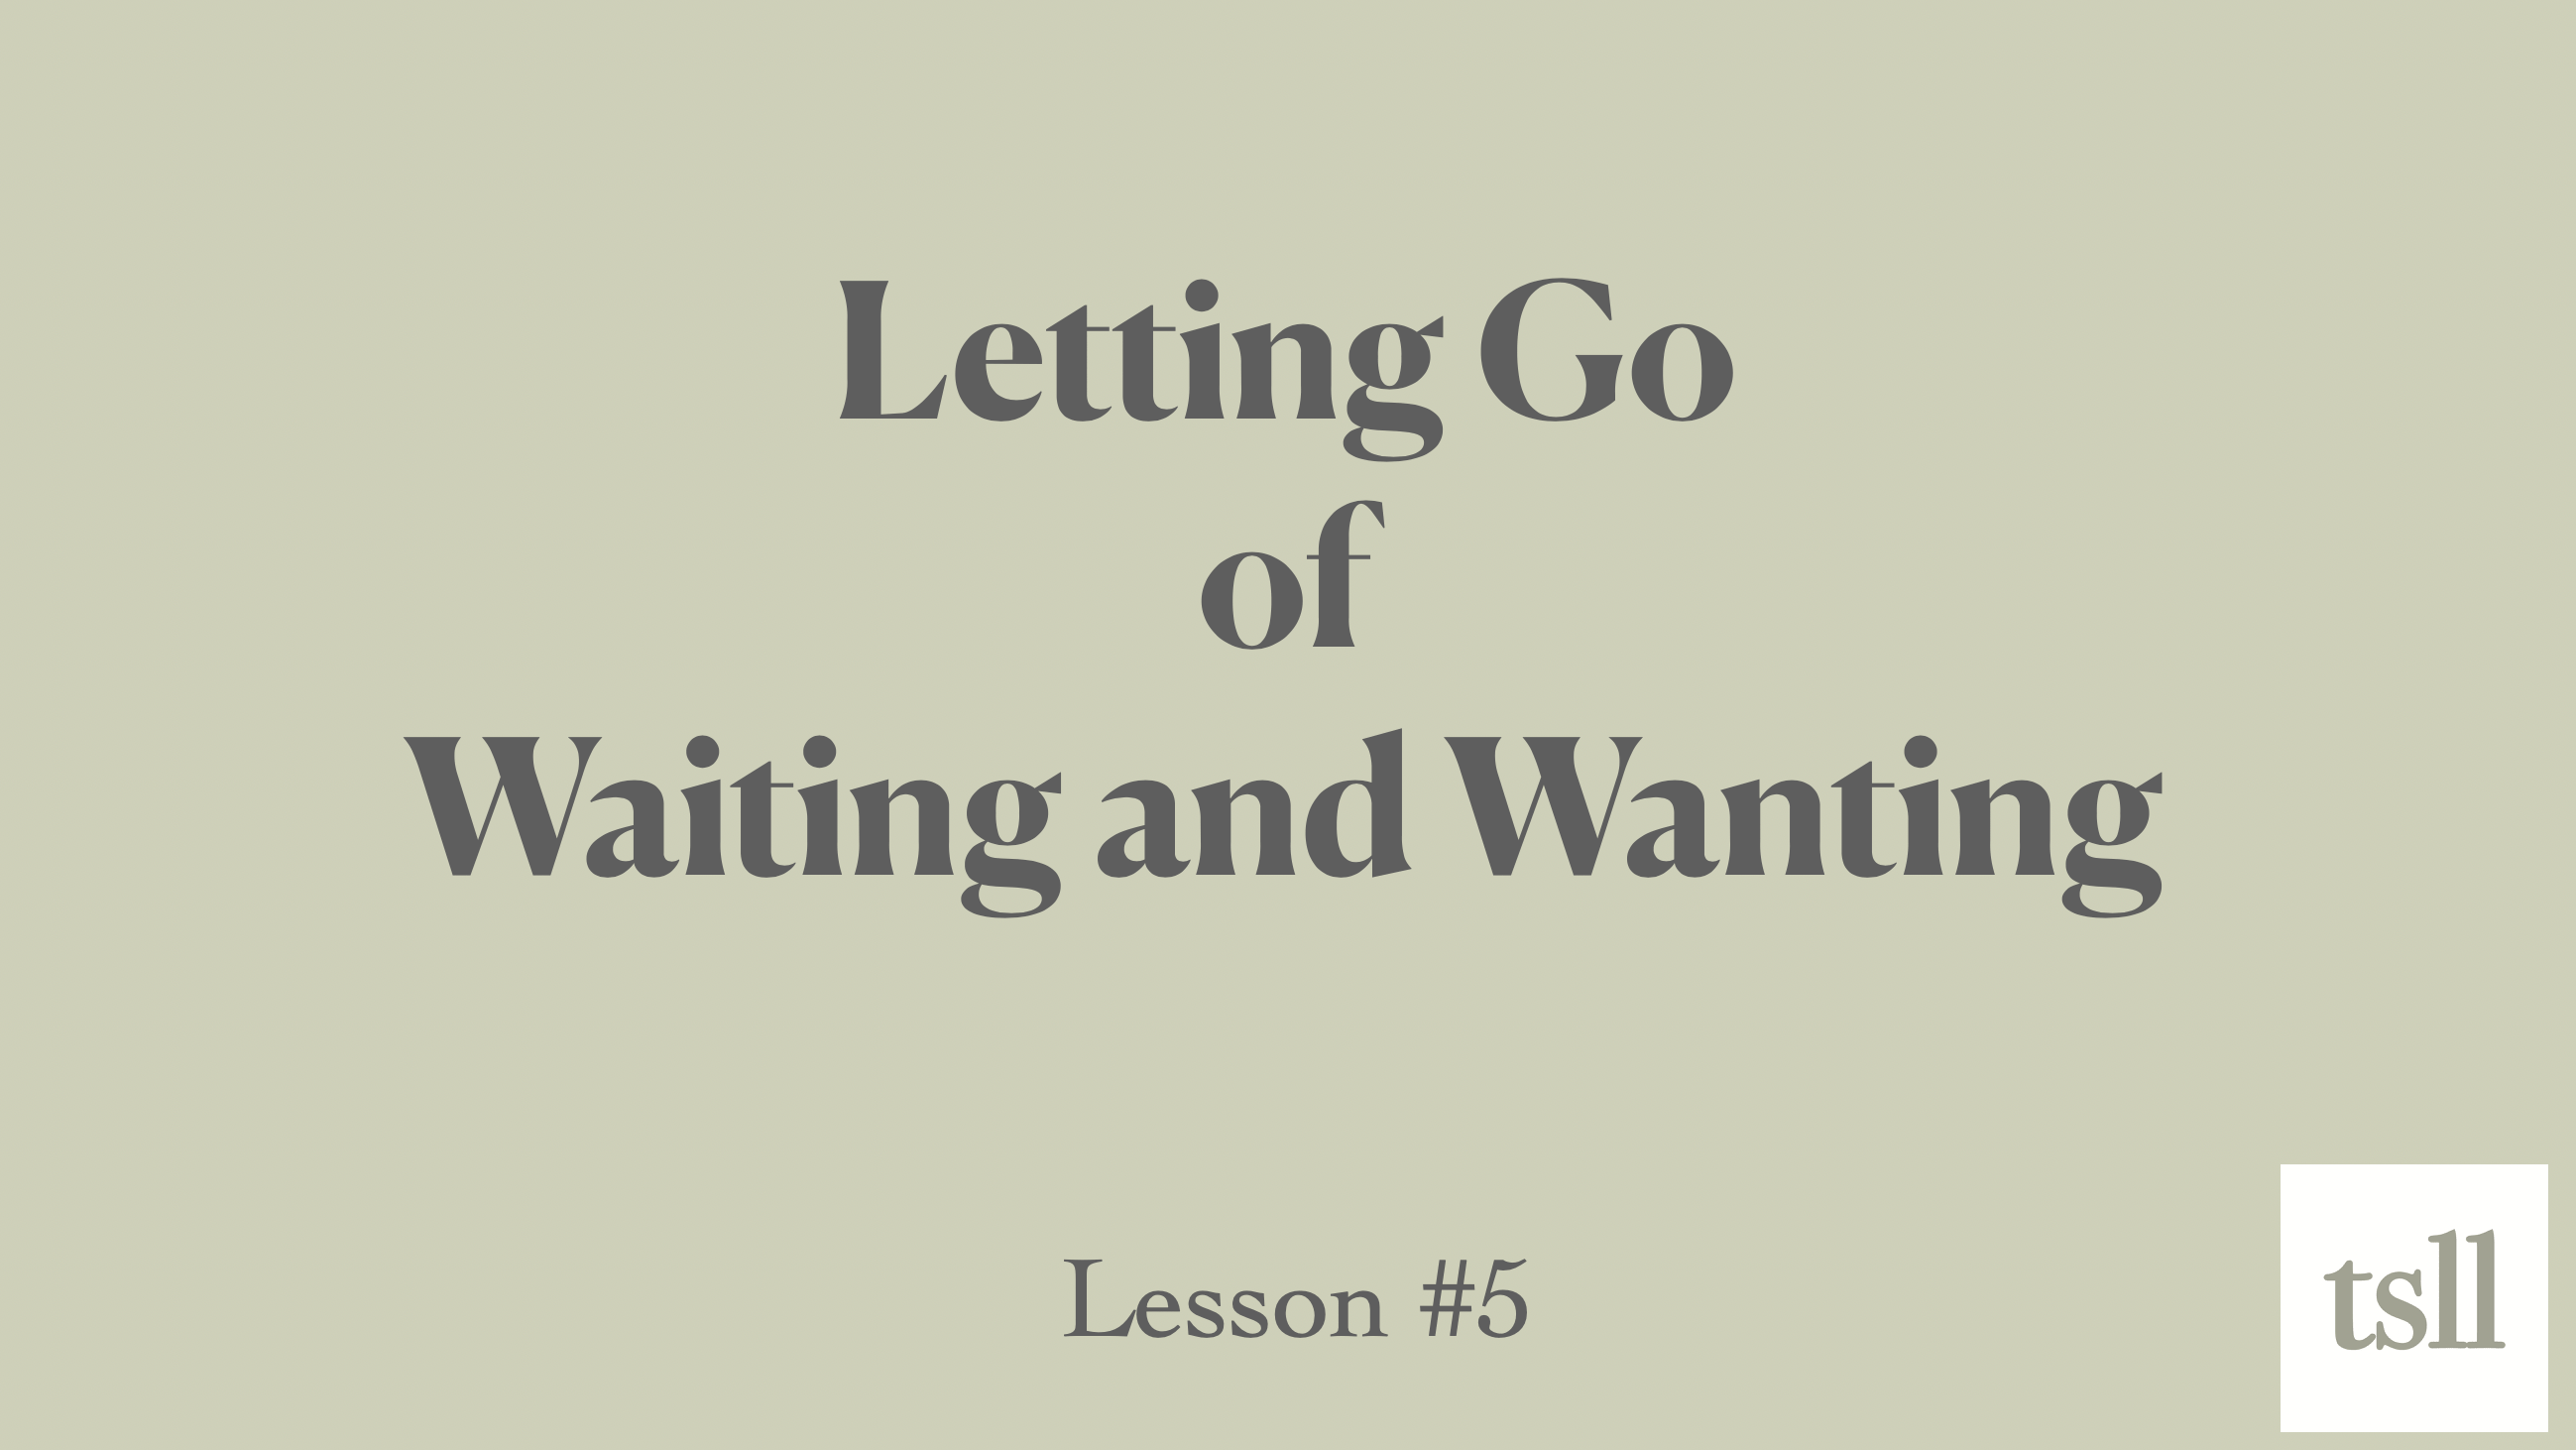 Part 3: Letting Go of Waiting and Wanting